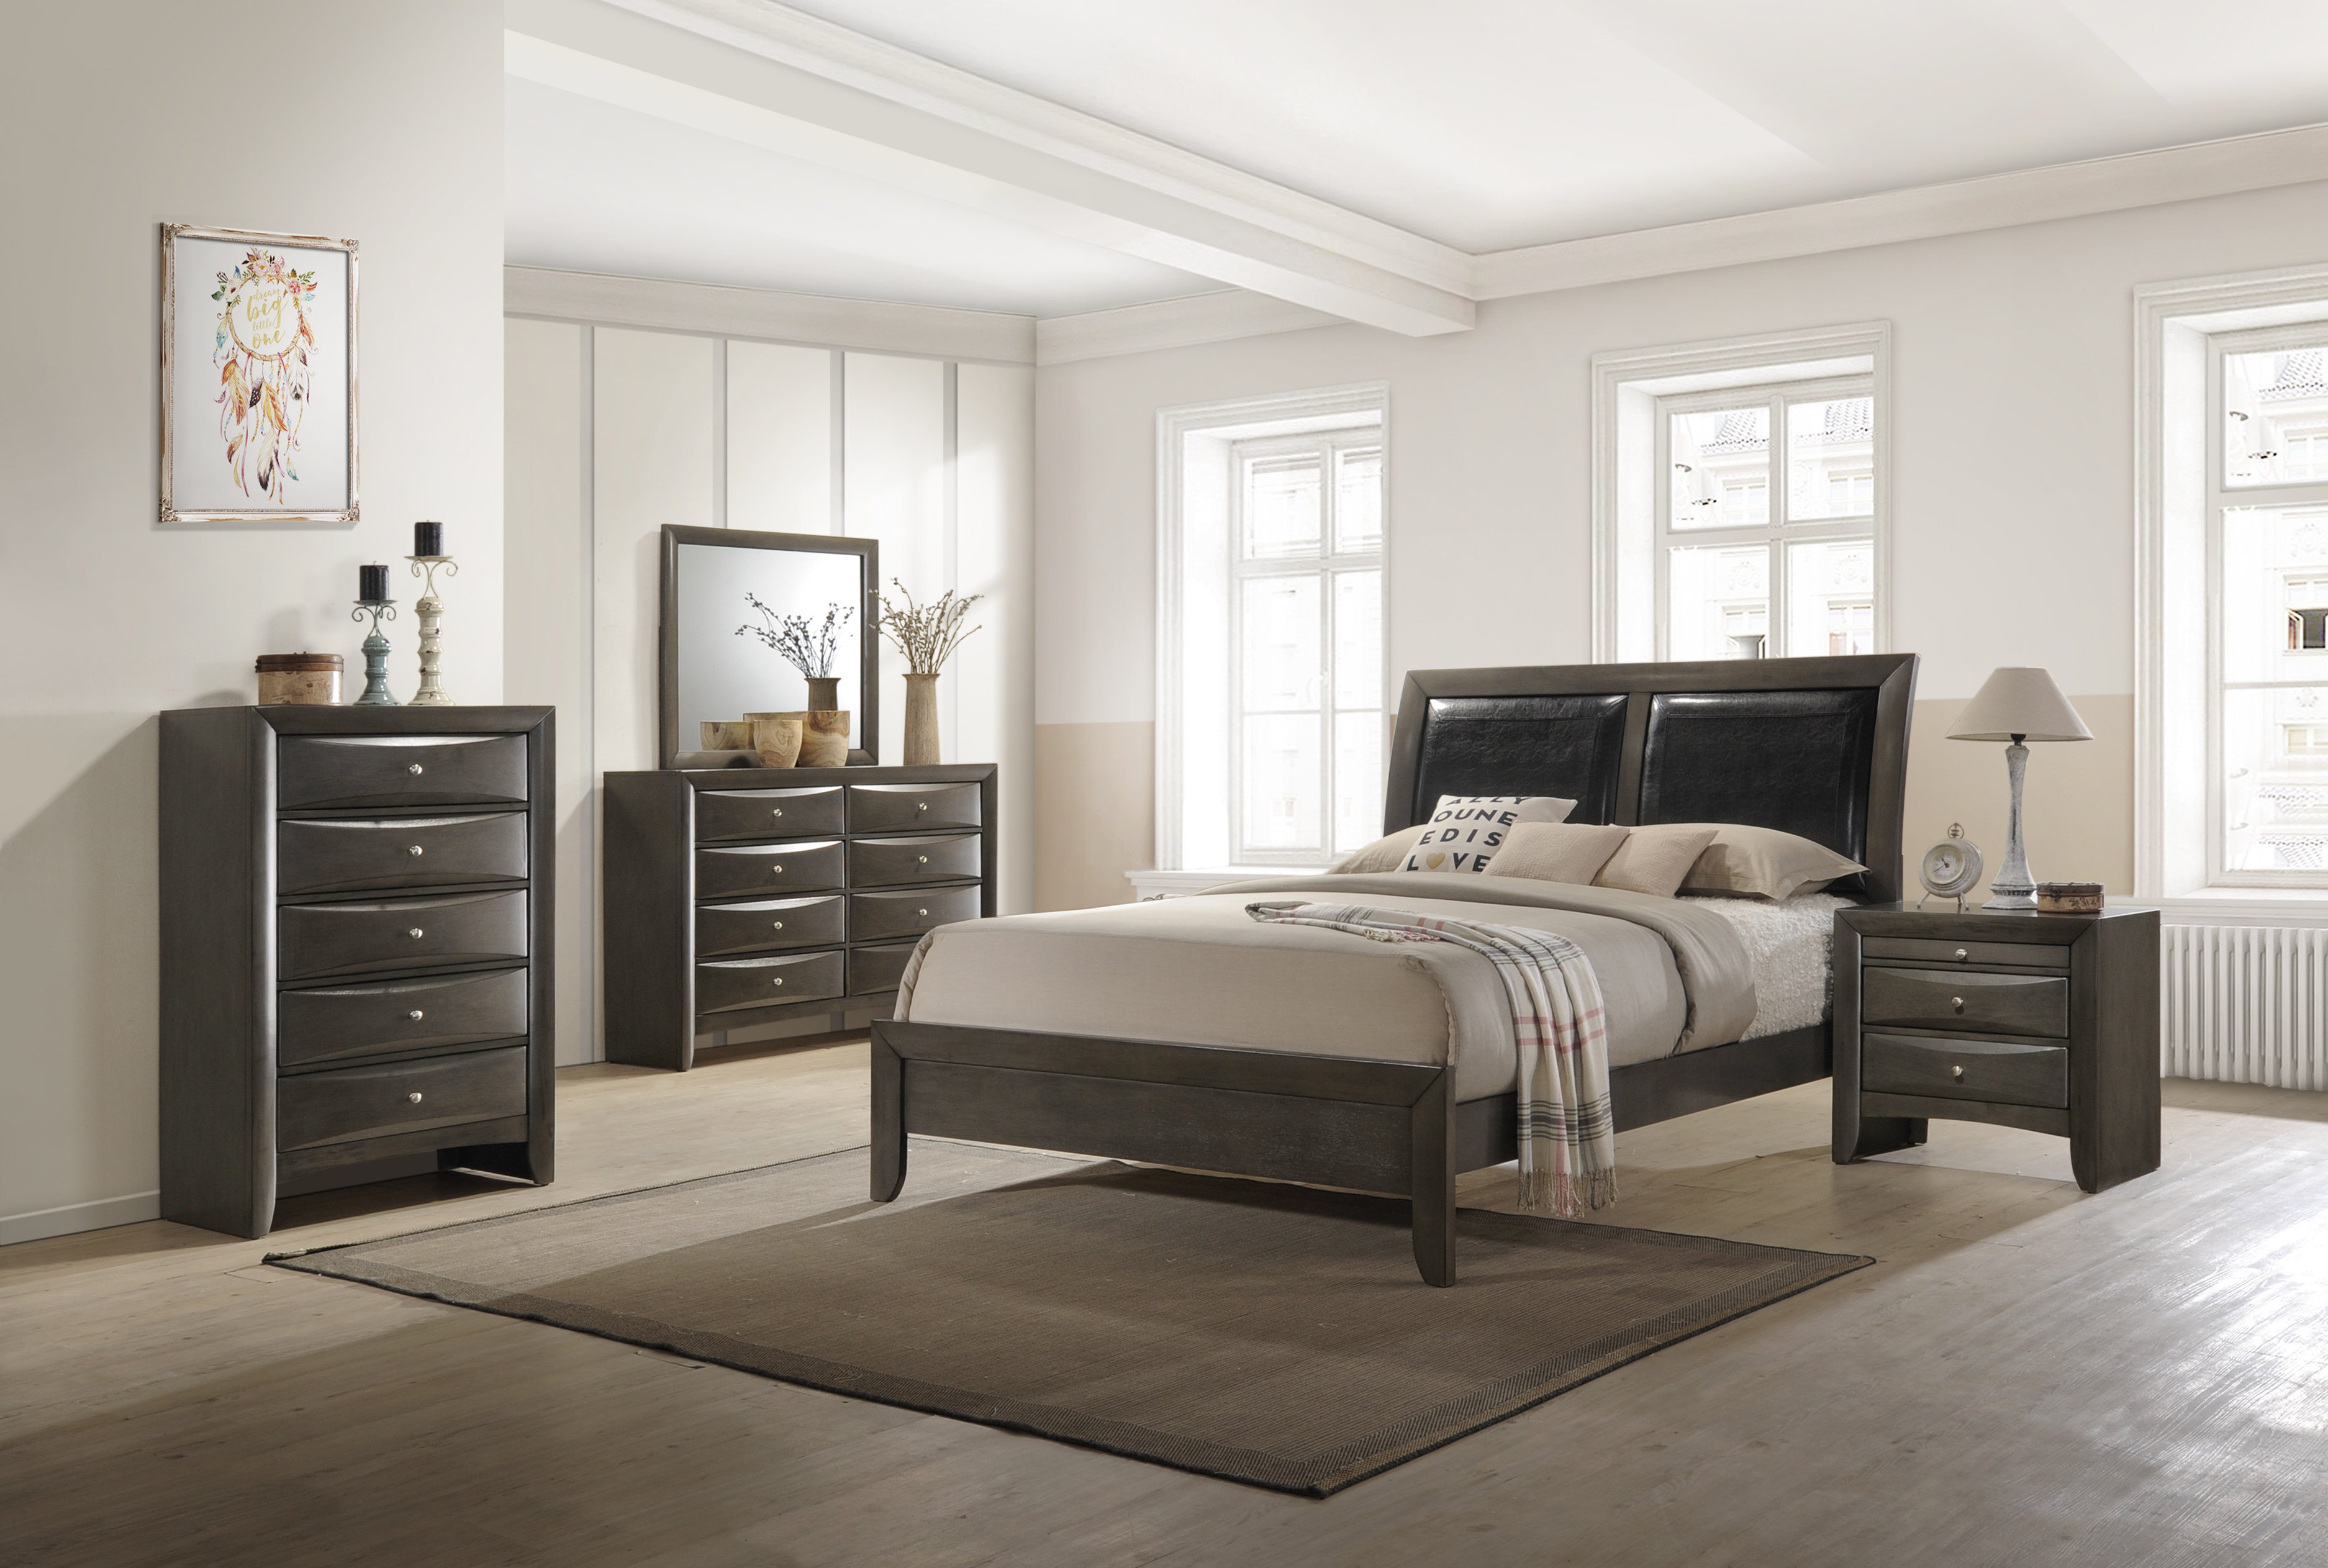 Transitonal Style Gray Solid Wood 4pc Bedroom Set Queen Size Bed Dresser Mirror Nightstand Master Bedroom Furniture